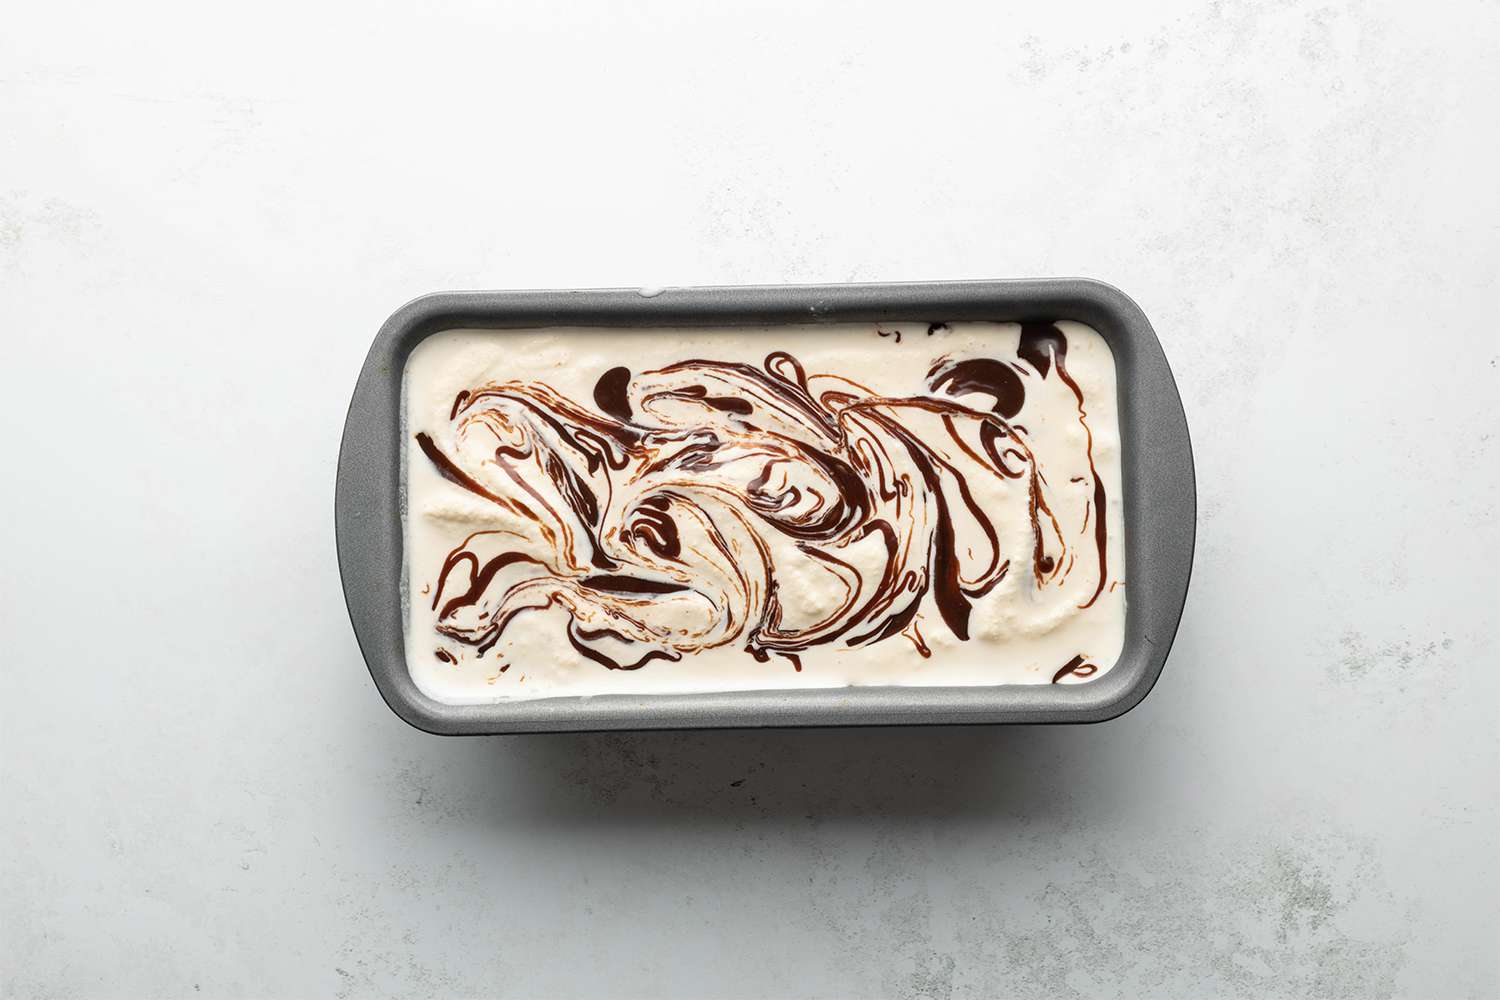 Ice cream with chocolate syrup in a container 